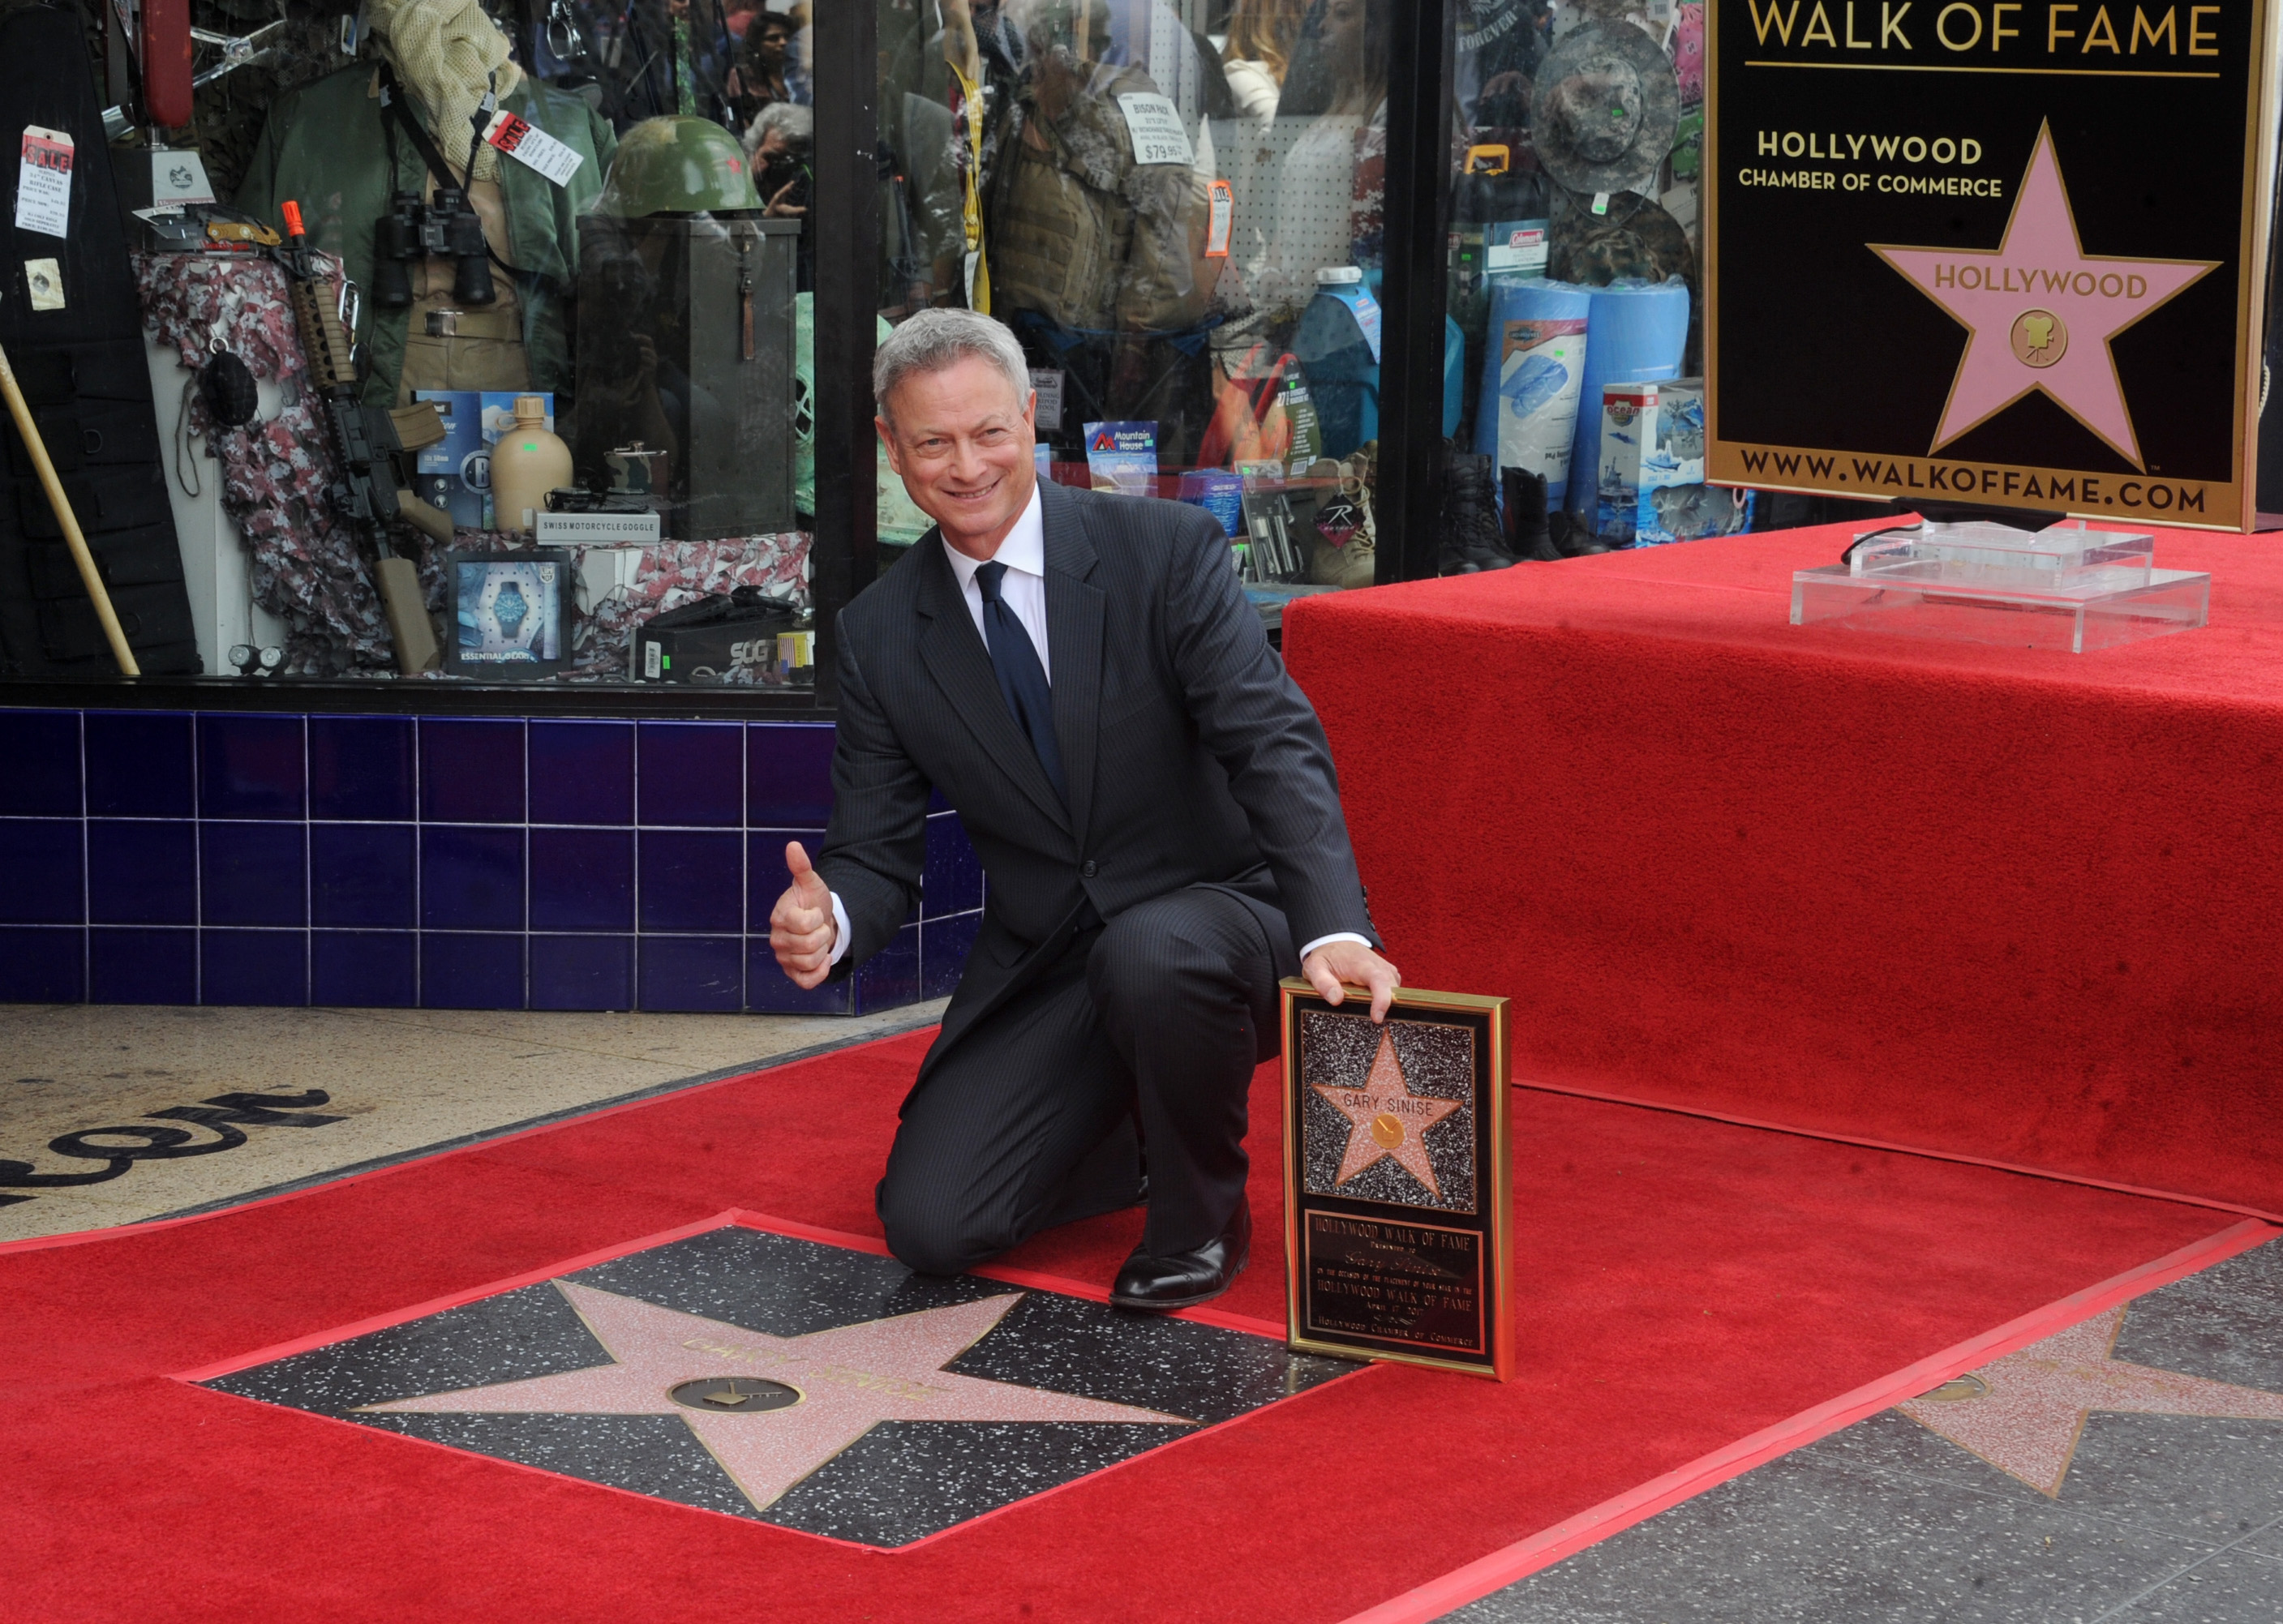 Gary Sinise is honored with a Star on the Hollywood Walk of Fame in Hollywood, California, on April 17, 2017. | Source: Getty Images